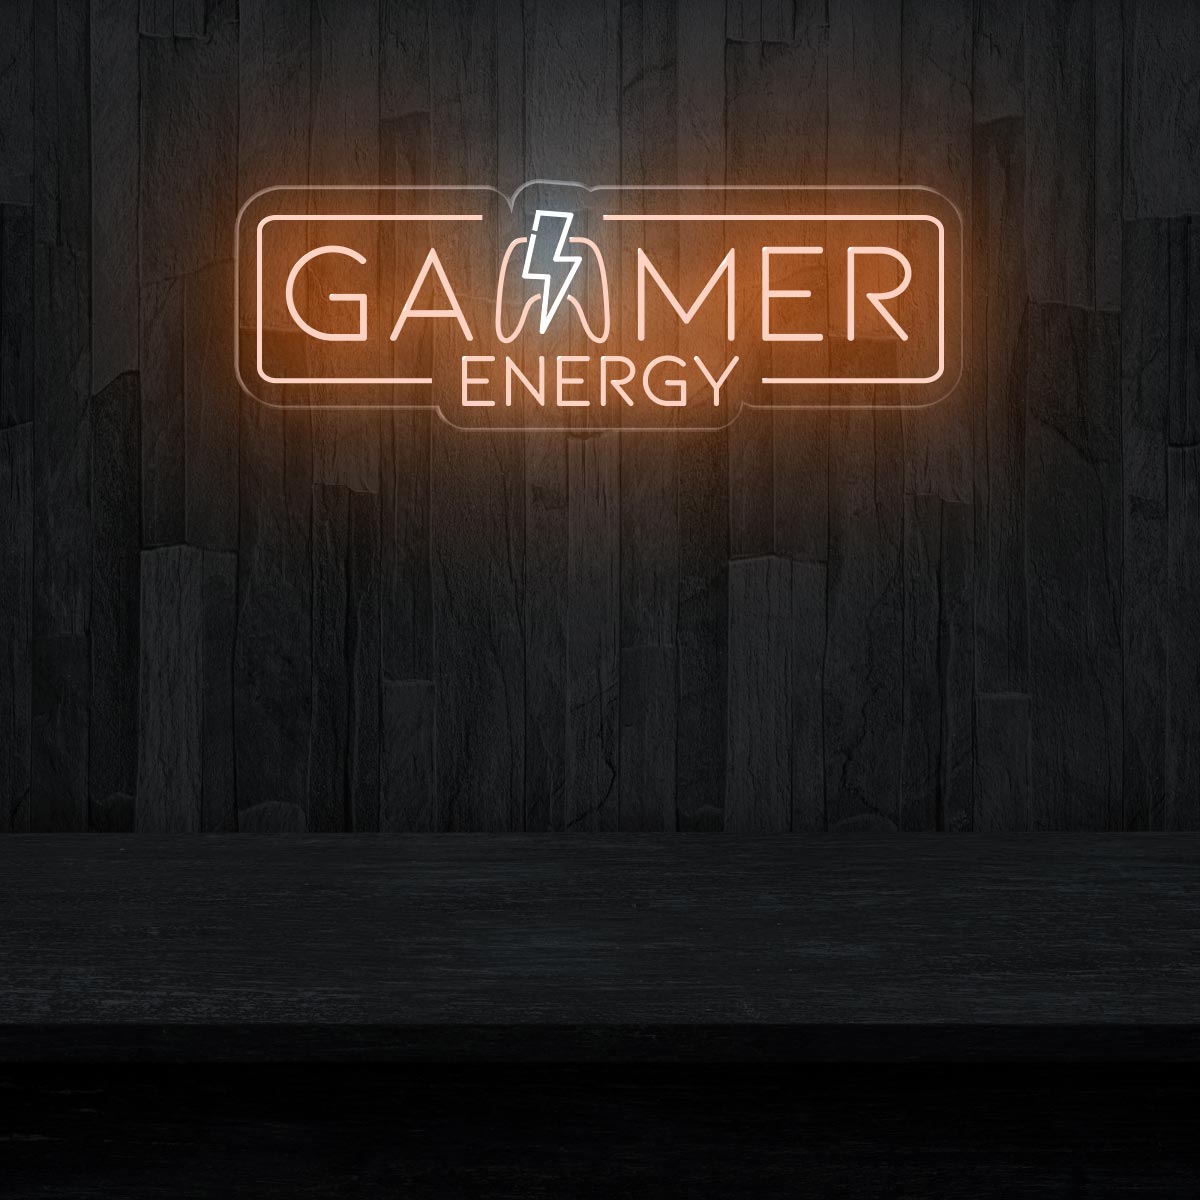 Gamer Energy LED Neon Sign: Brighten Up Your Gaming Room - NEONXPERT